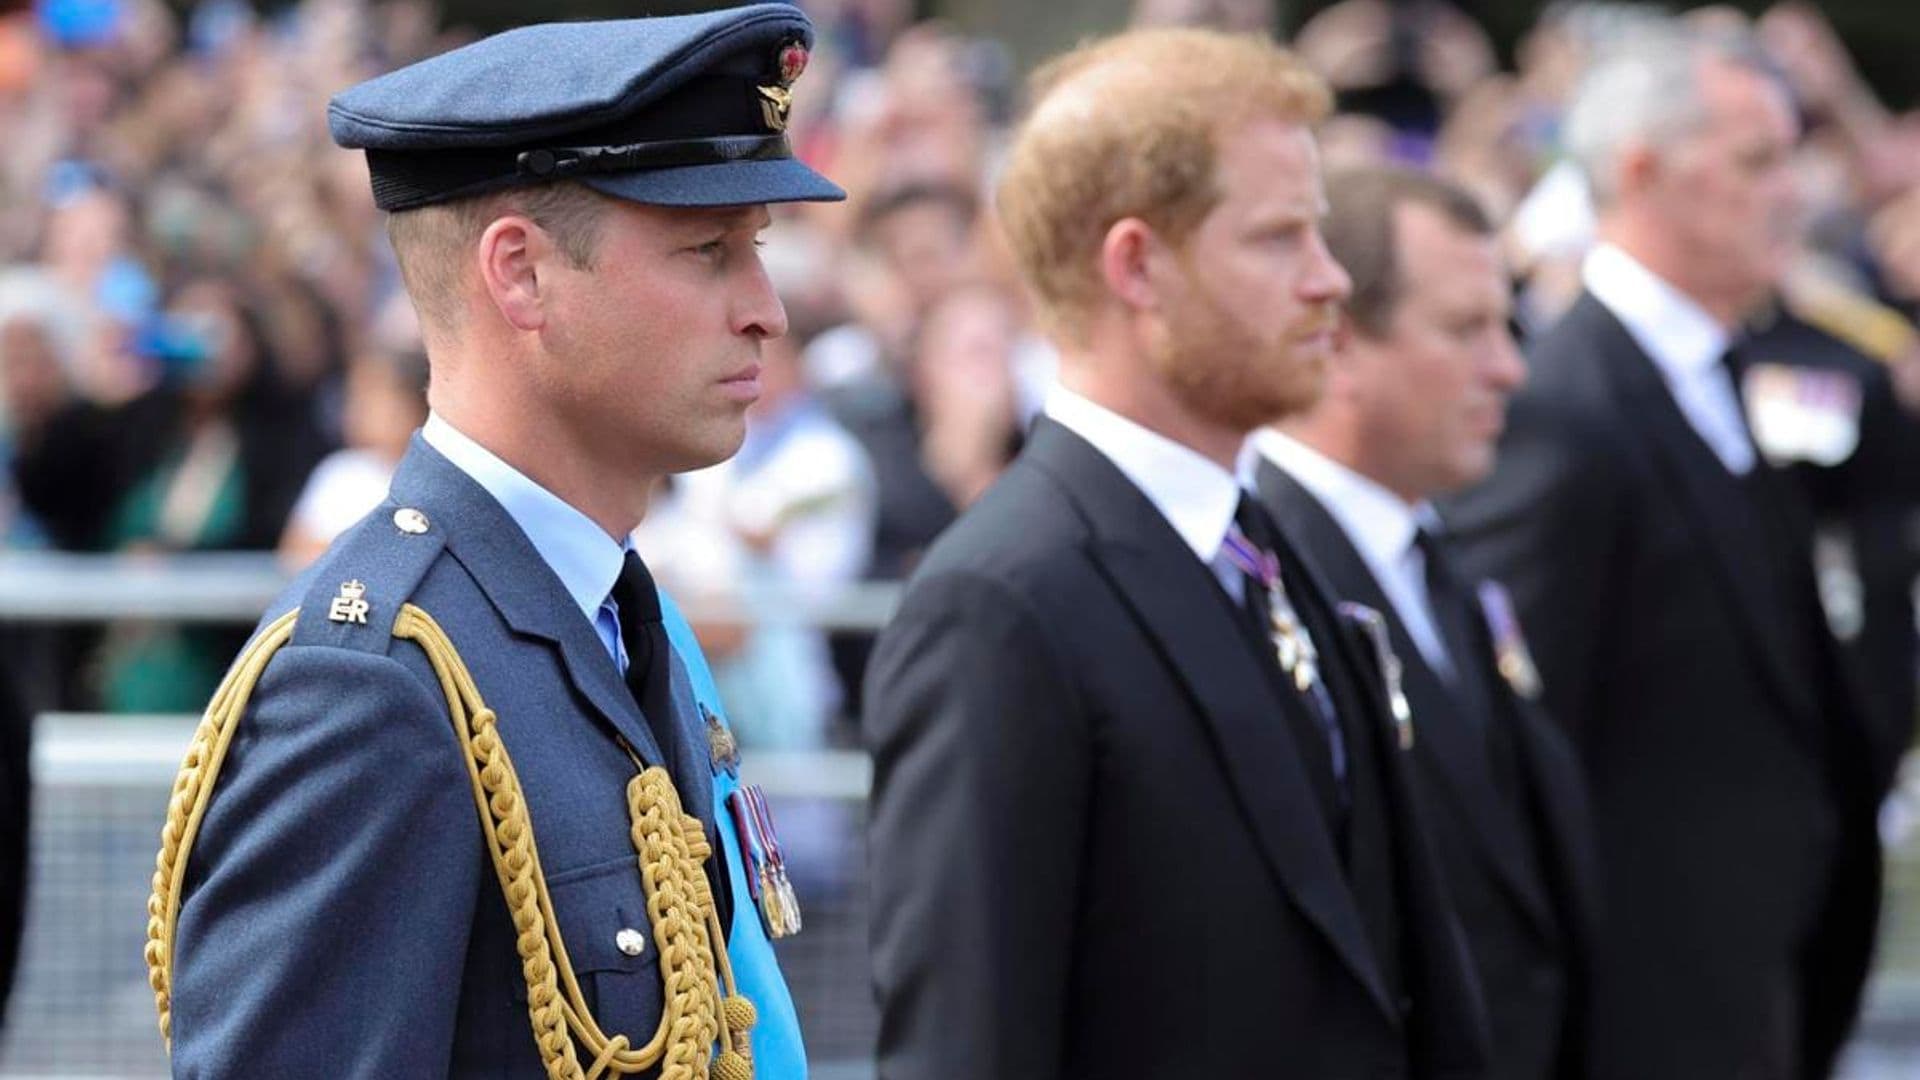 Prince William and Prince Harry walk side by side behind grandmother Queen Elizabeth’s coffin